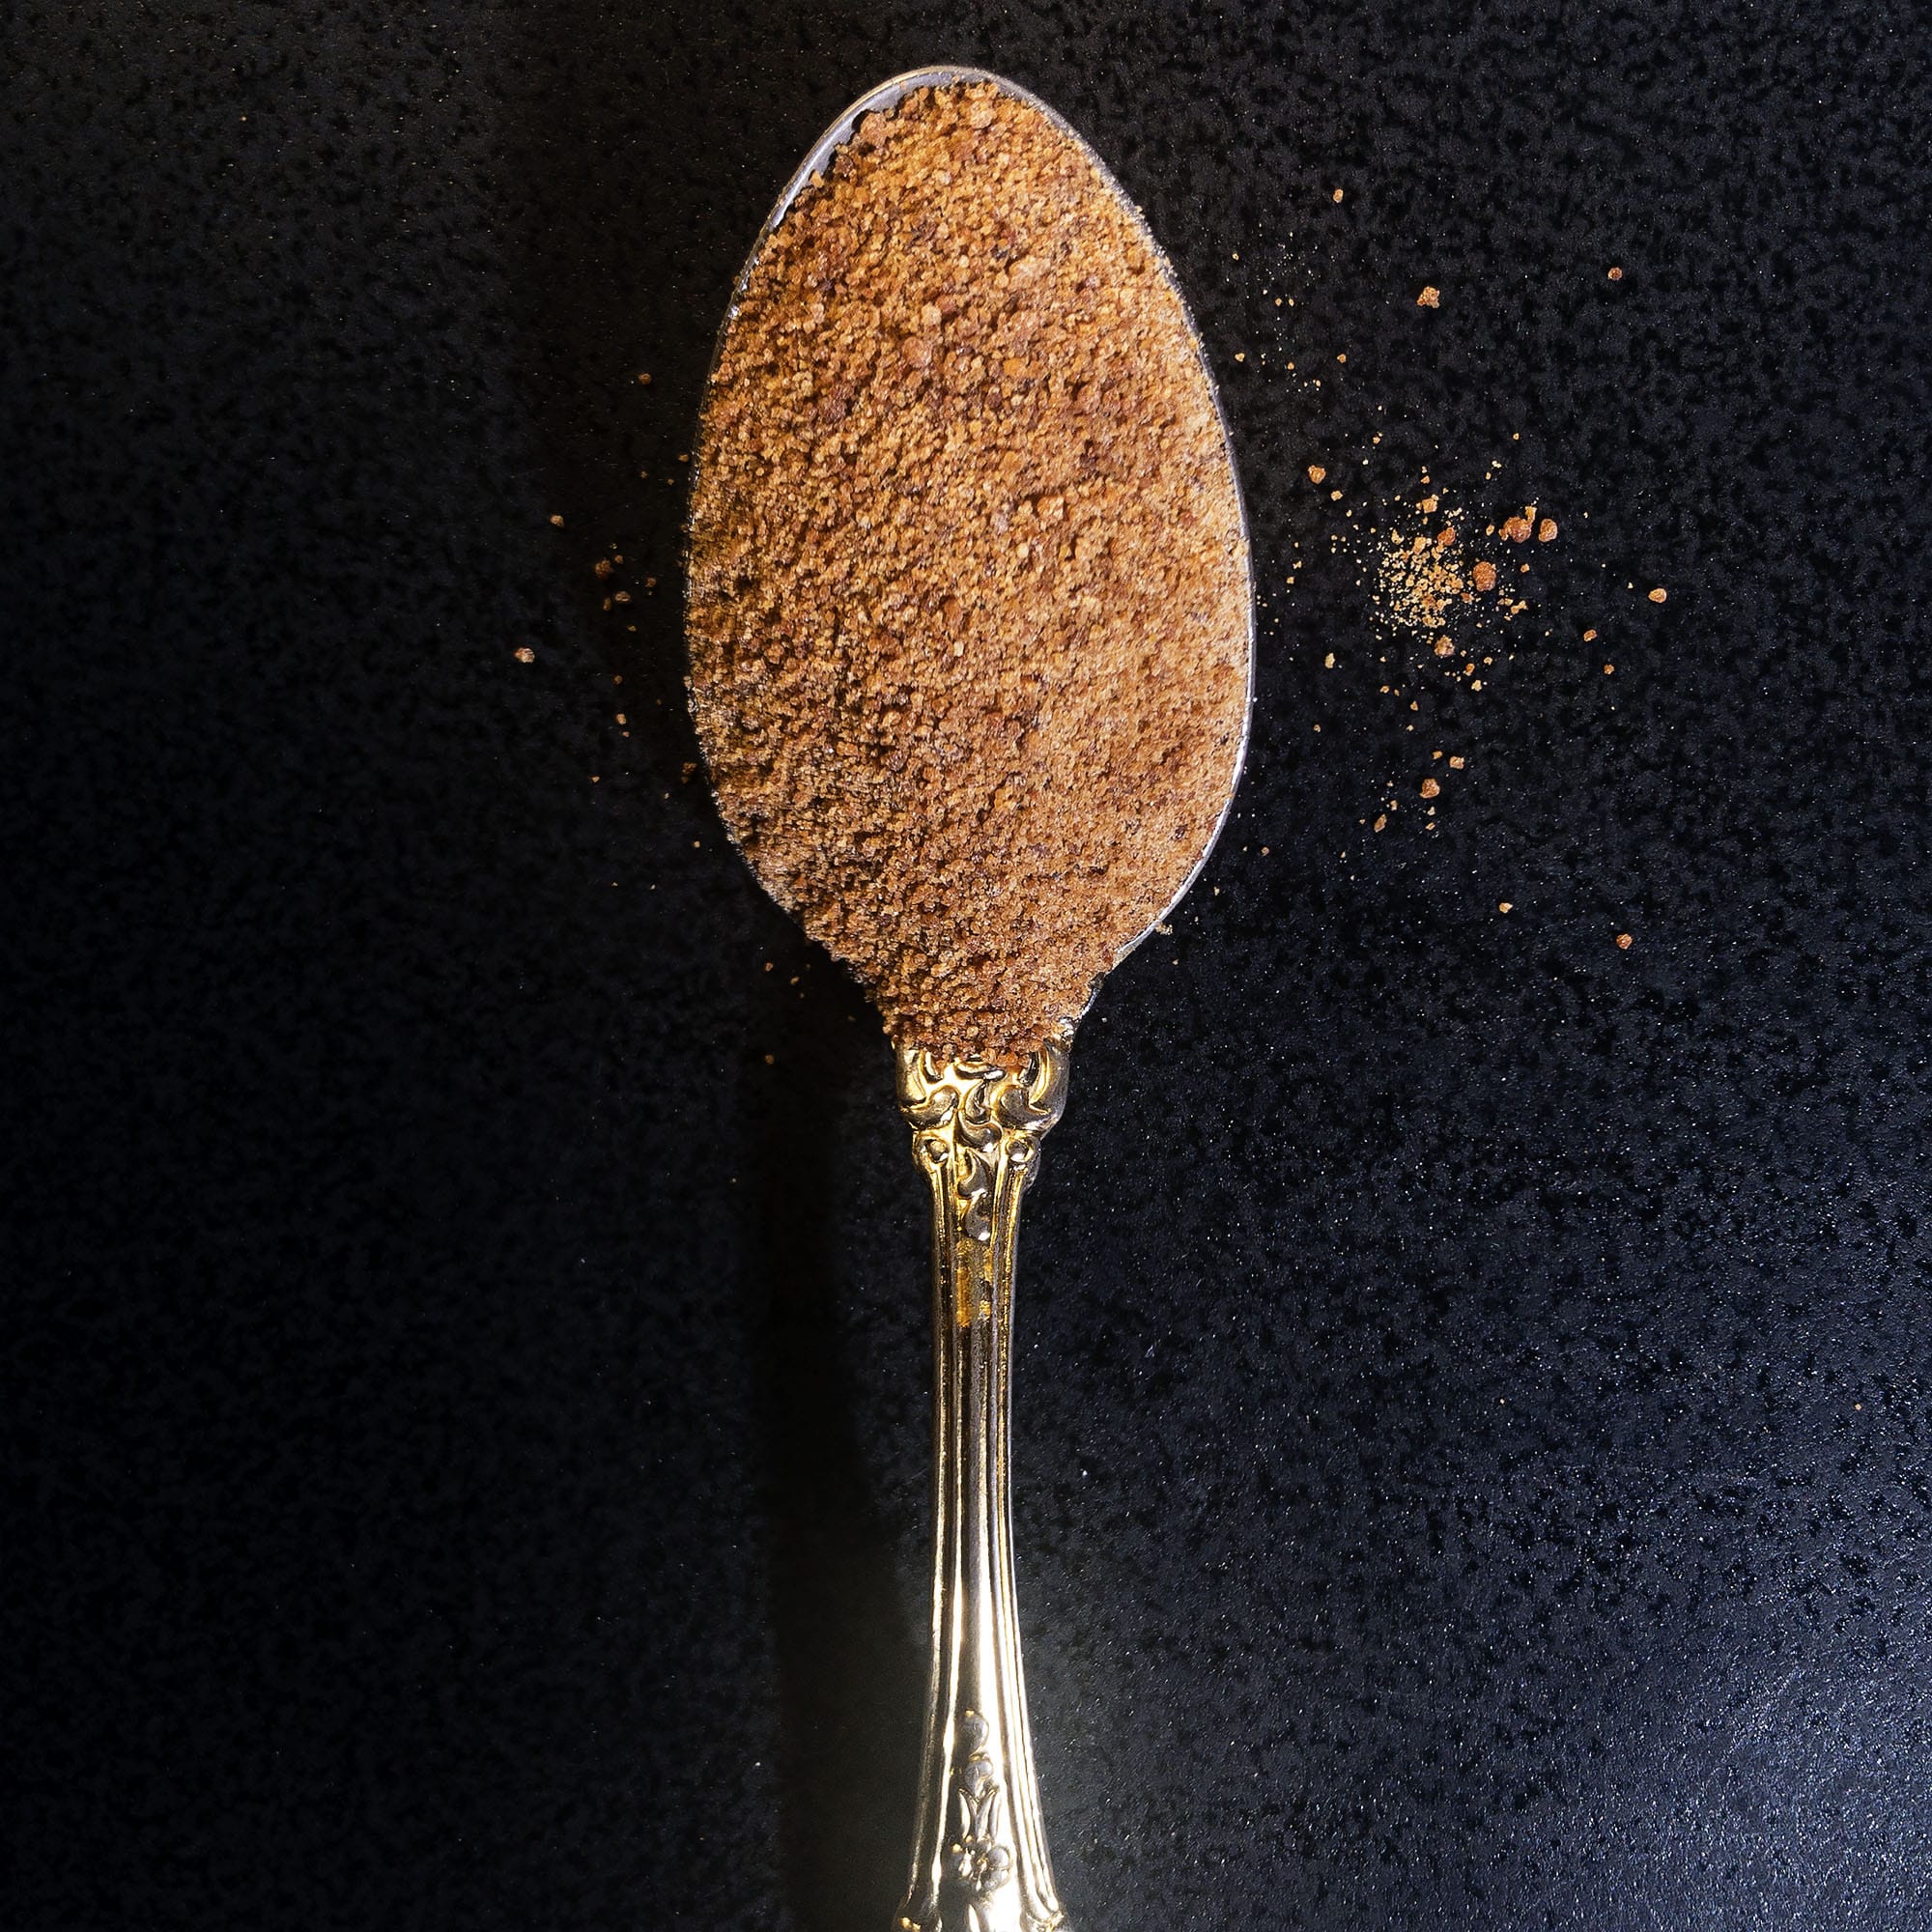 Coconut sugar on a spoon, against a black background